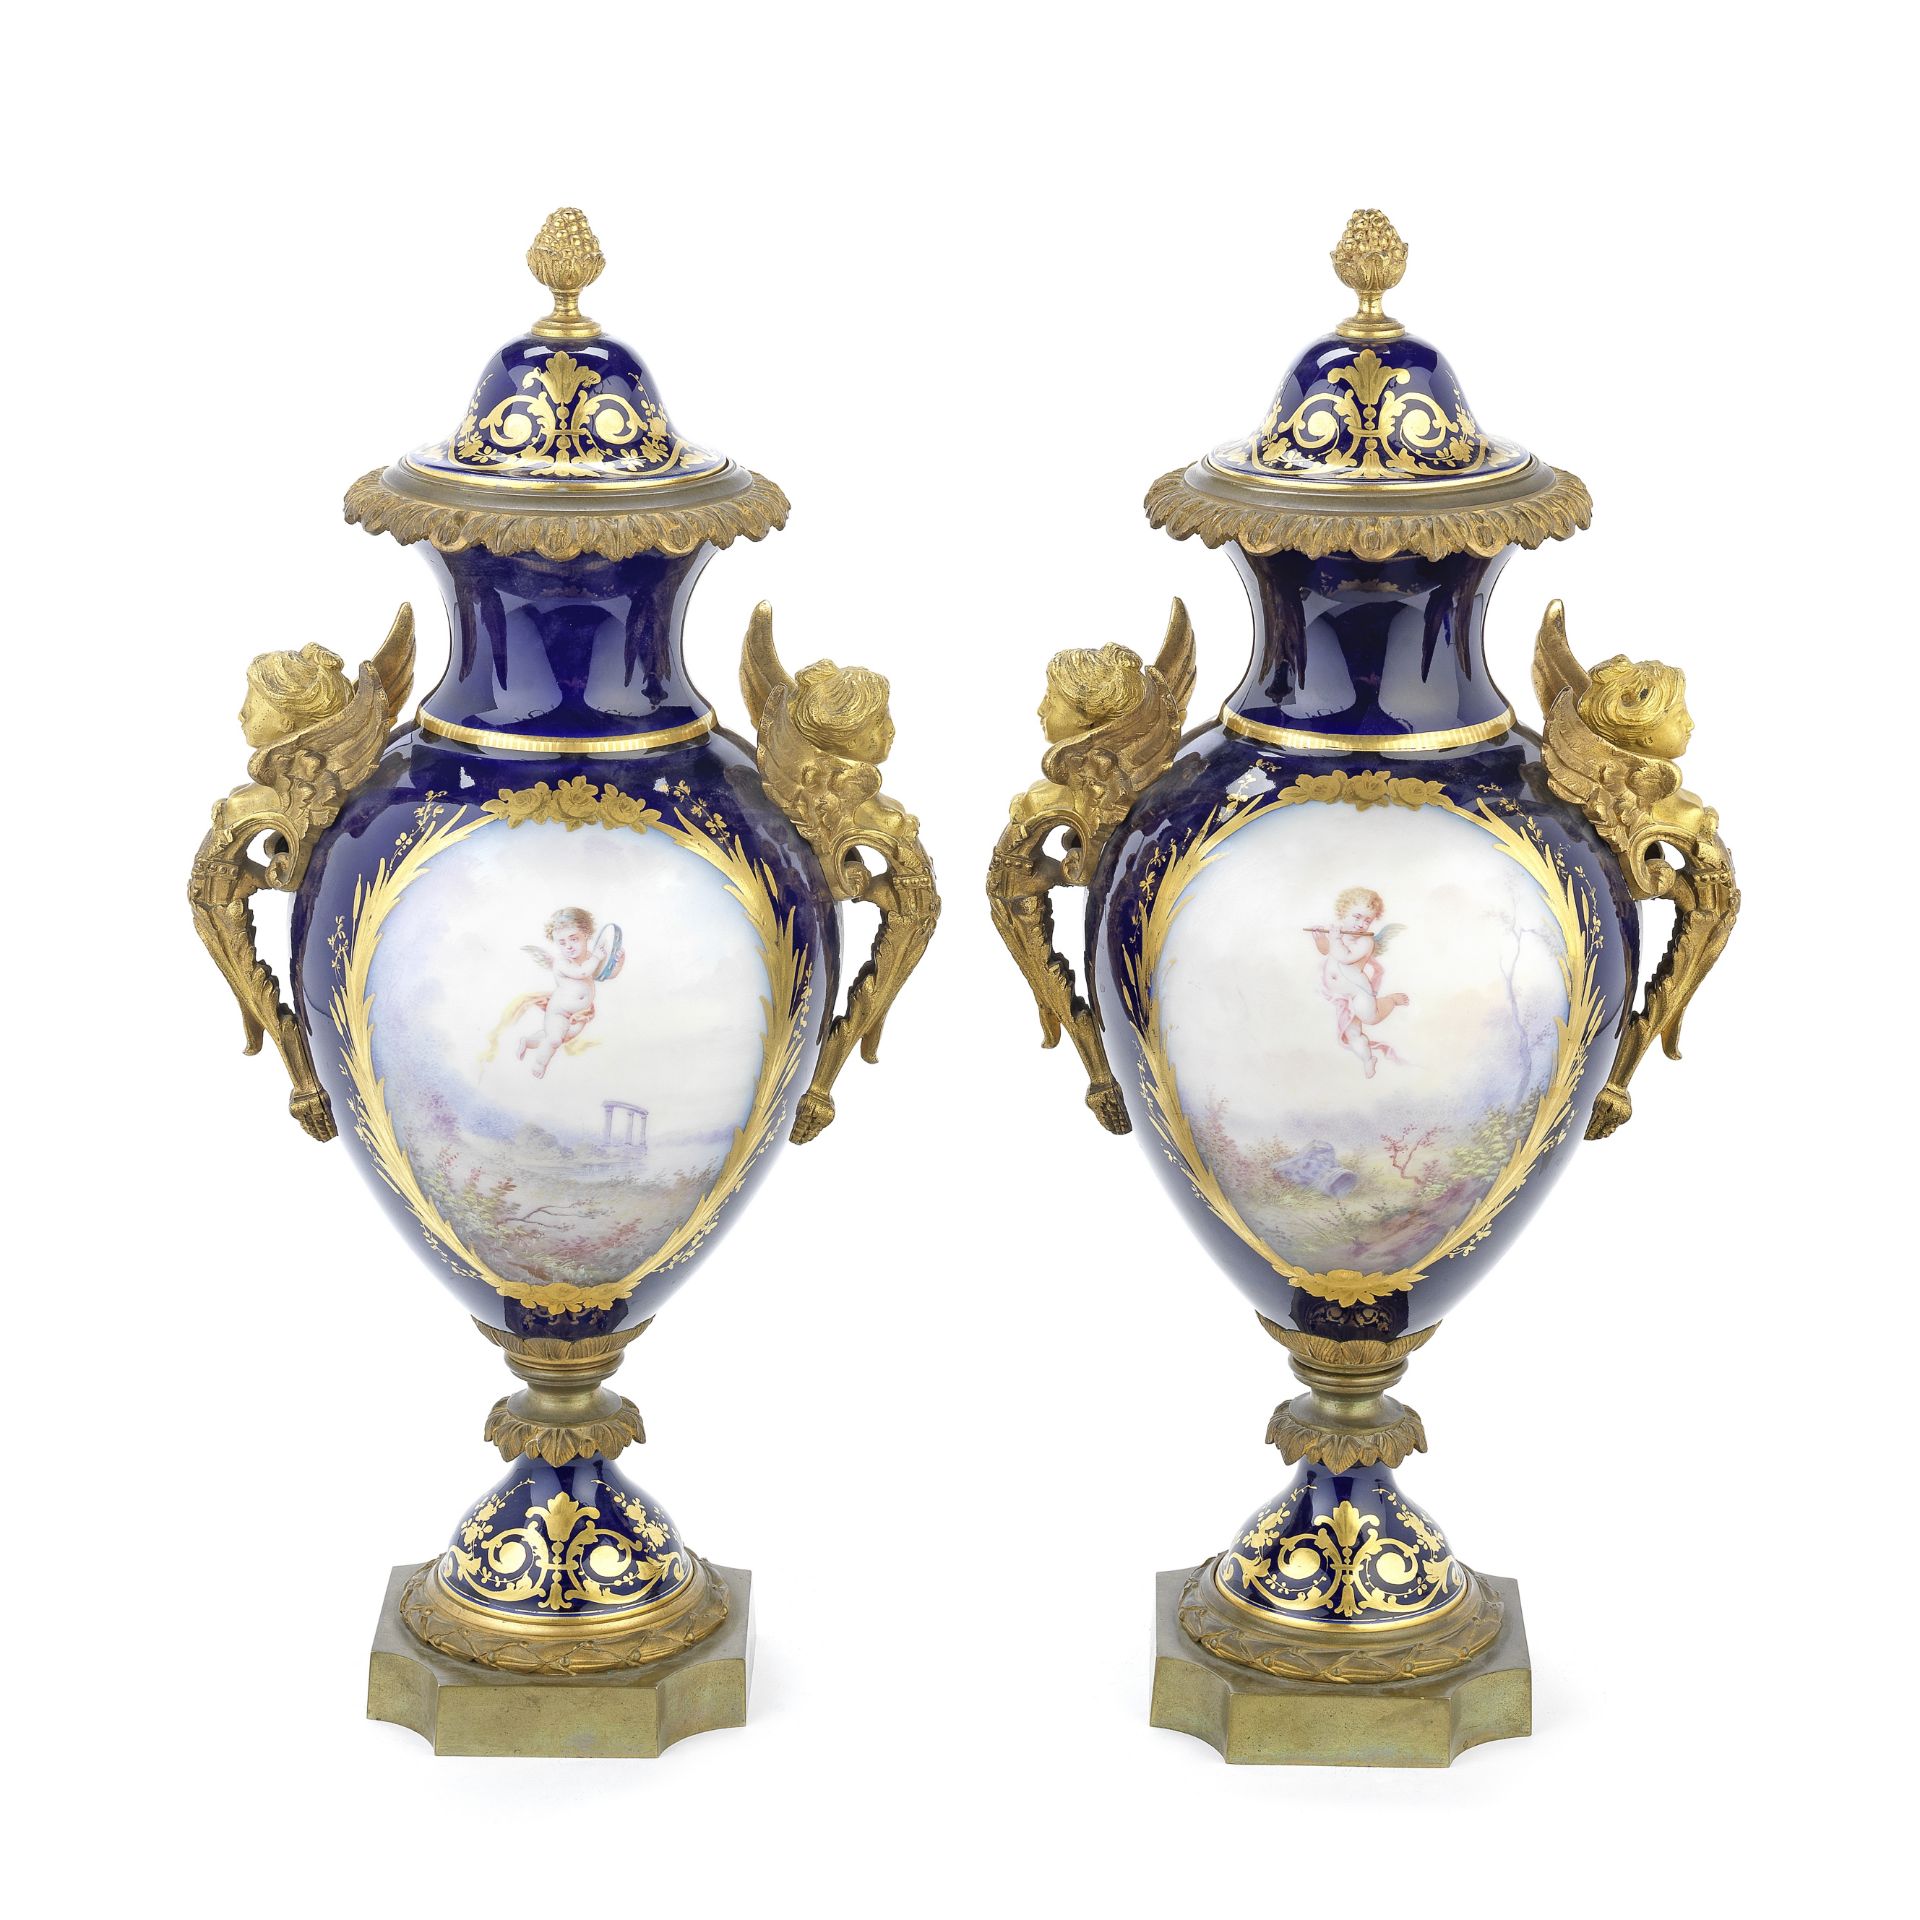 A pair of late 19th century French gilt bronze mounted S&#232;vres-style porcelain garniture vase...